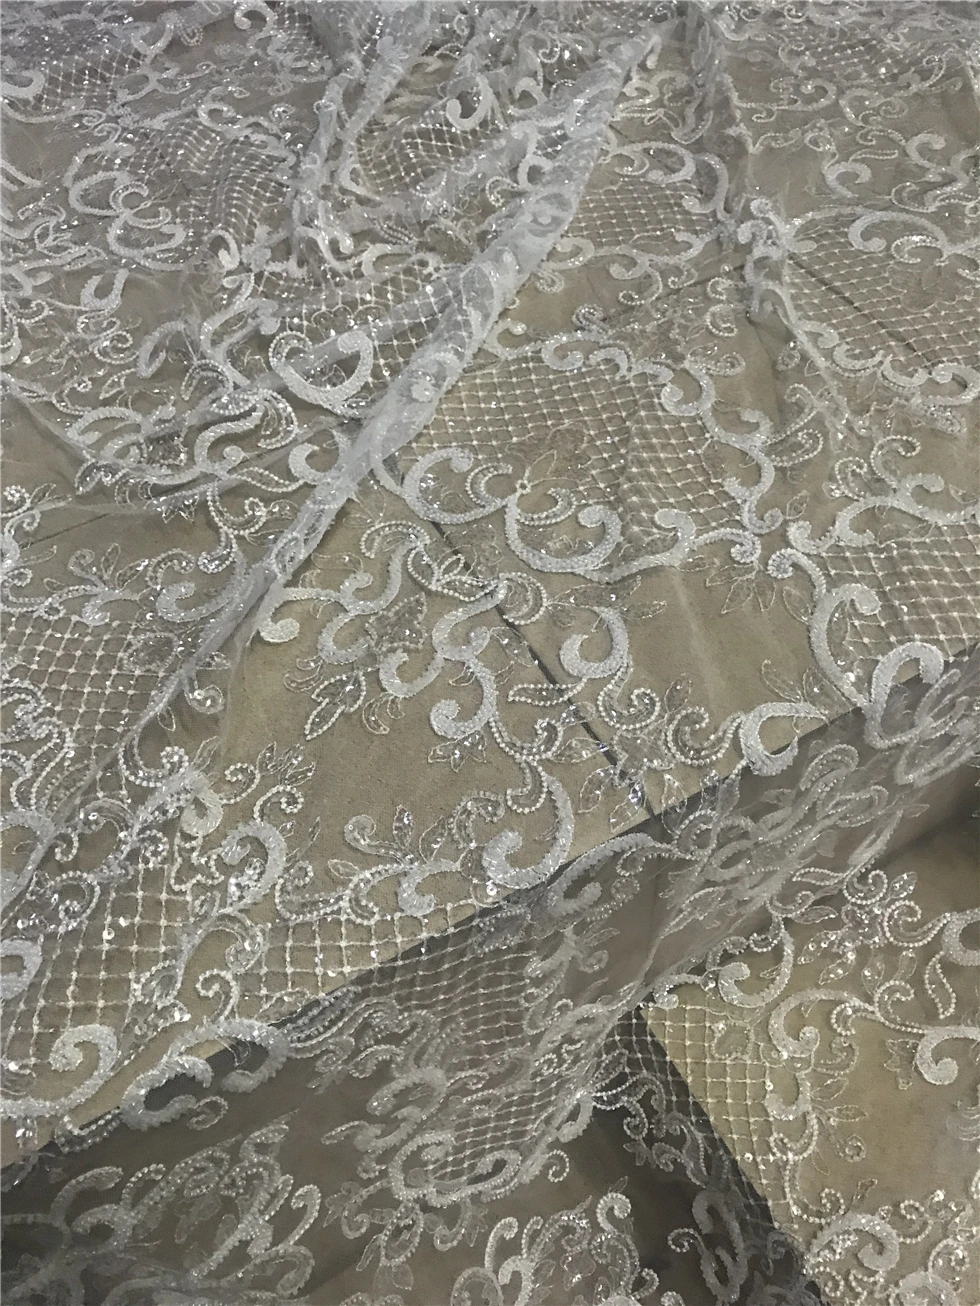 

African Sequins and beads Embroidered Nigerian Wedding Lace Fabrics SYJ-988681 High Quality Lace French Tulle Lace Fabric